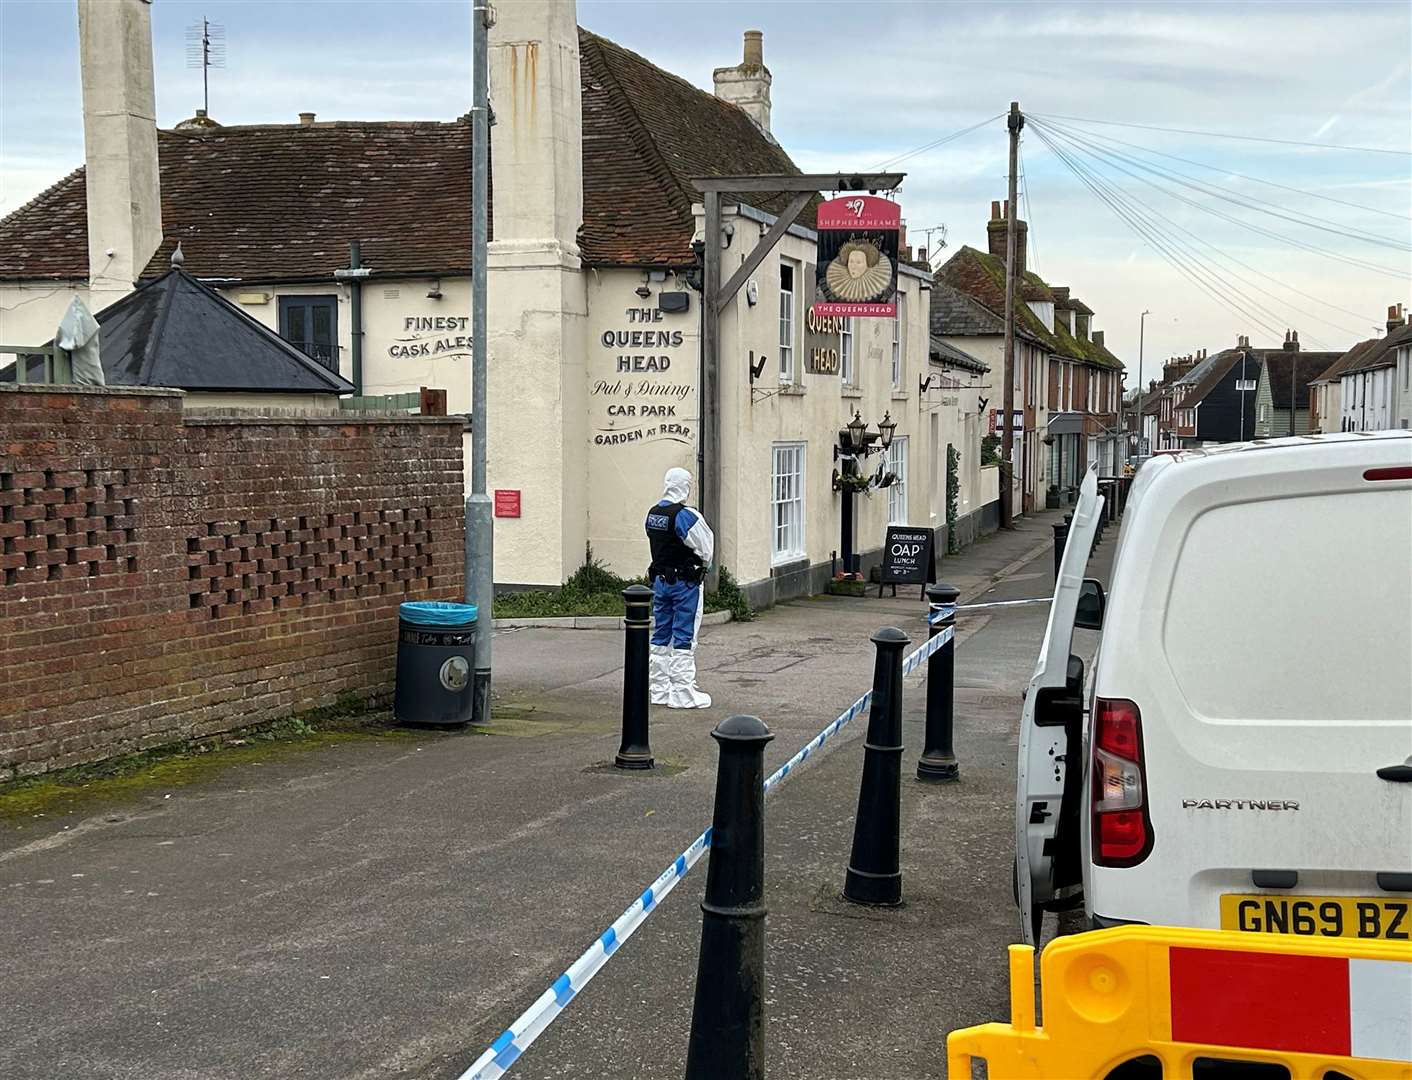 Police are at the Queens Head pub in Boughton under Blean